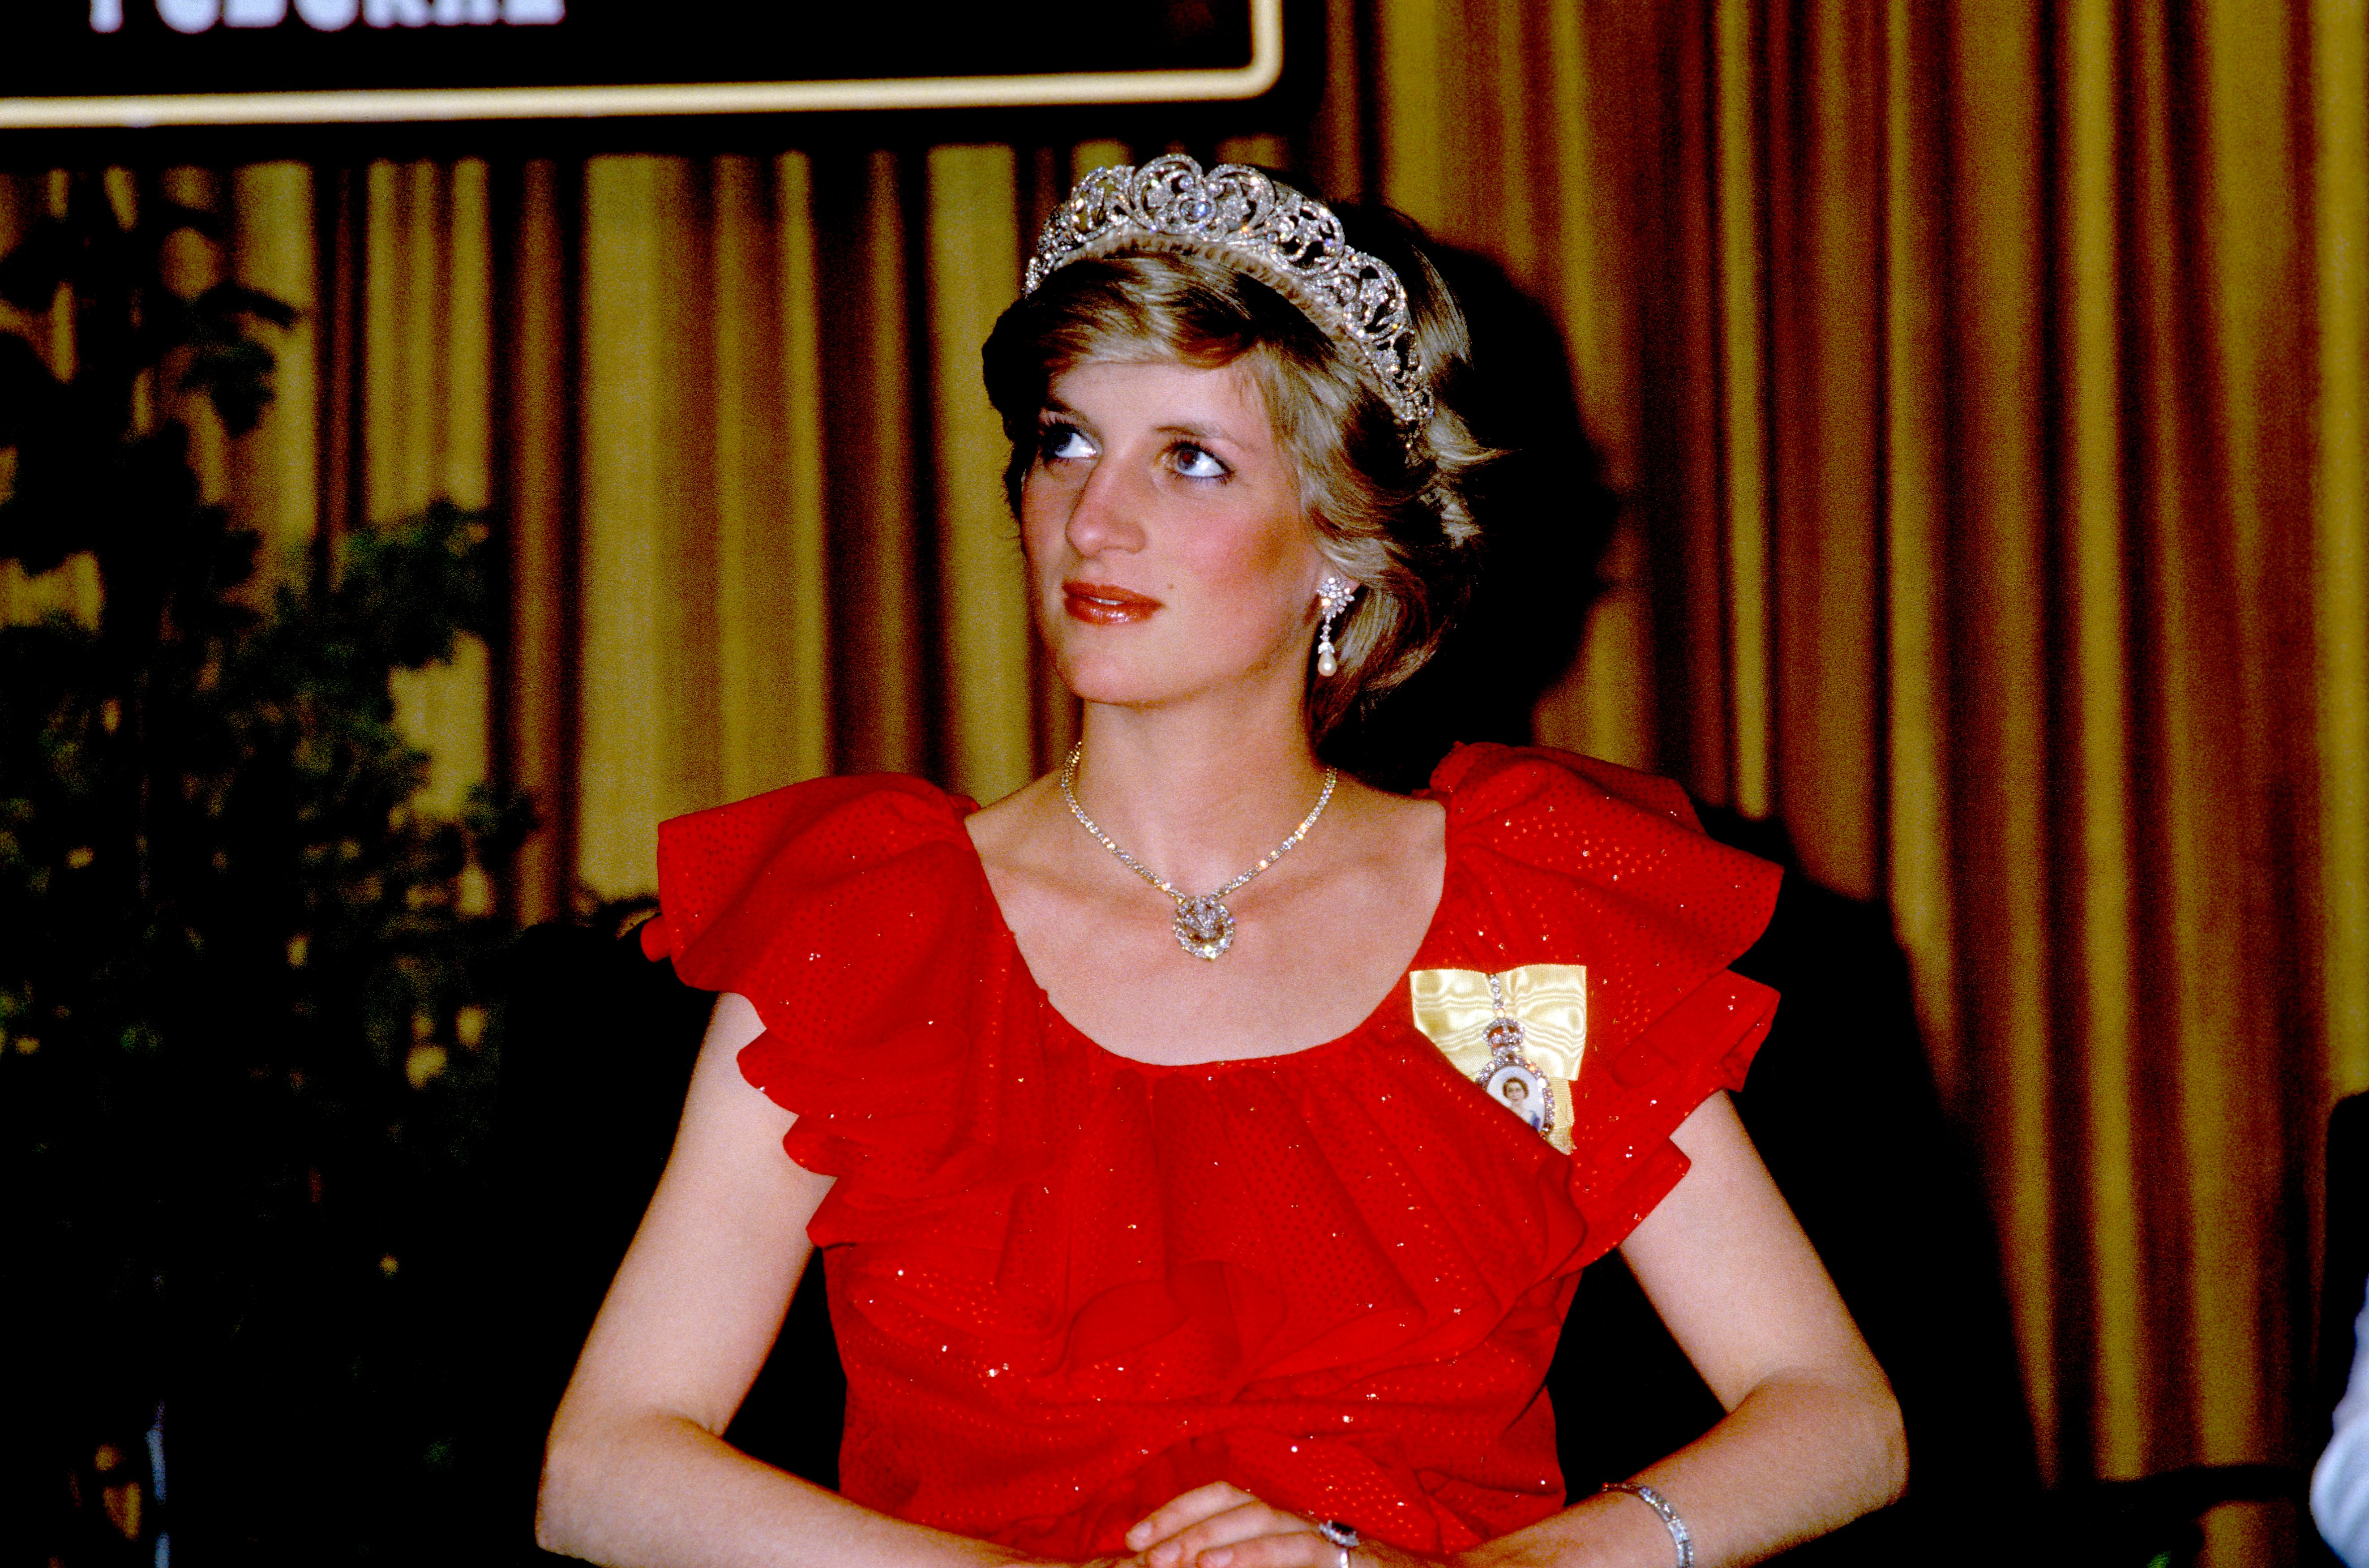  Princess Dian visits Australia for the State Reception in Hobart, 30th March 1983 | Photo: Getty Images